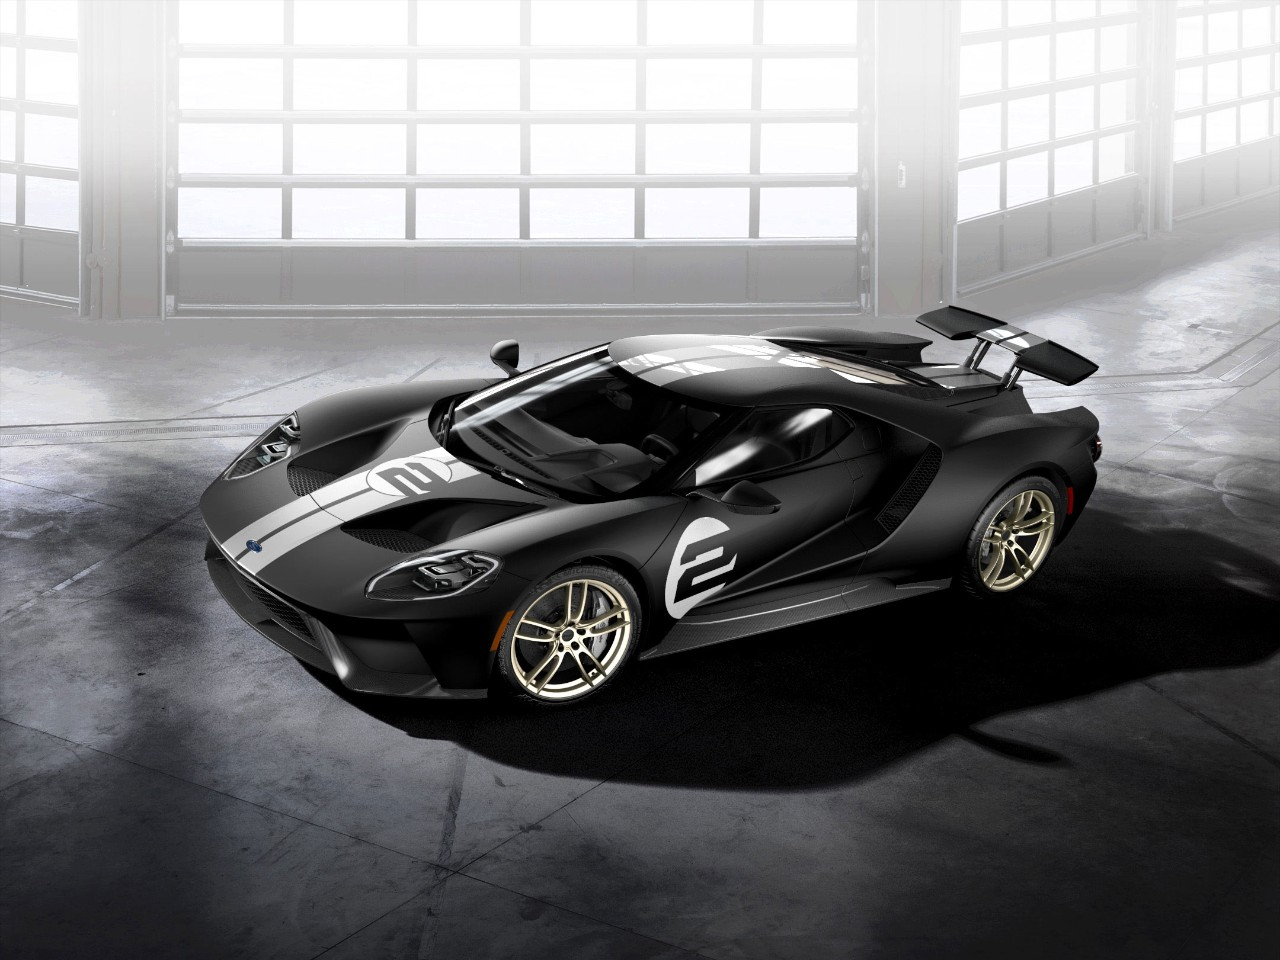 Ford Takes Racing Fans Back in Time with the All-New 2017 Ford GT